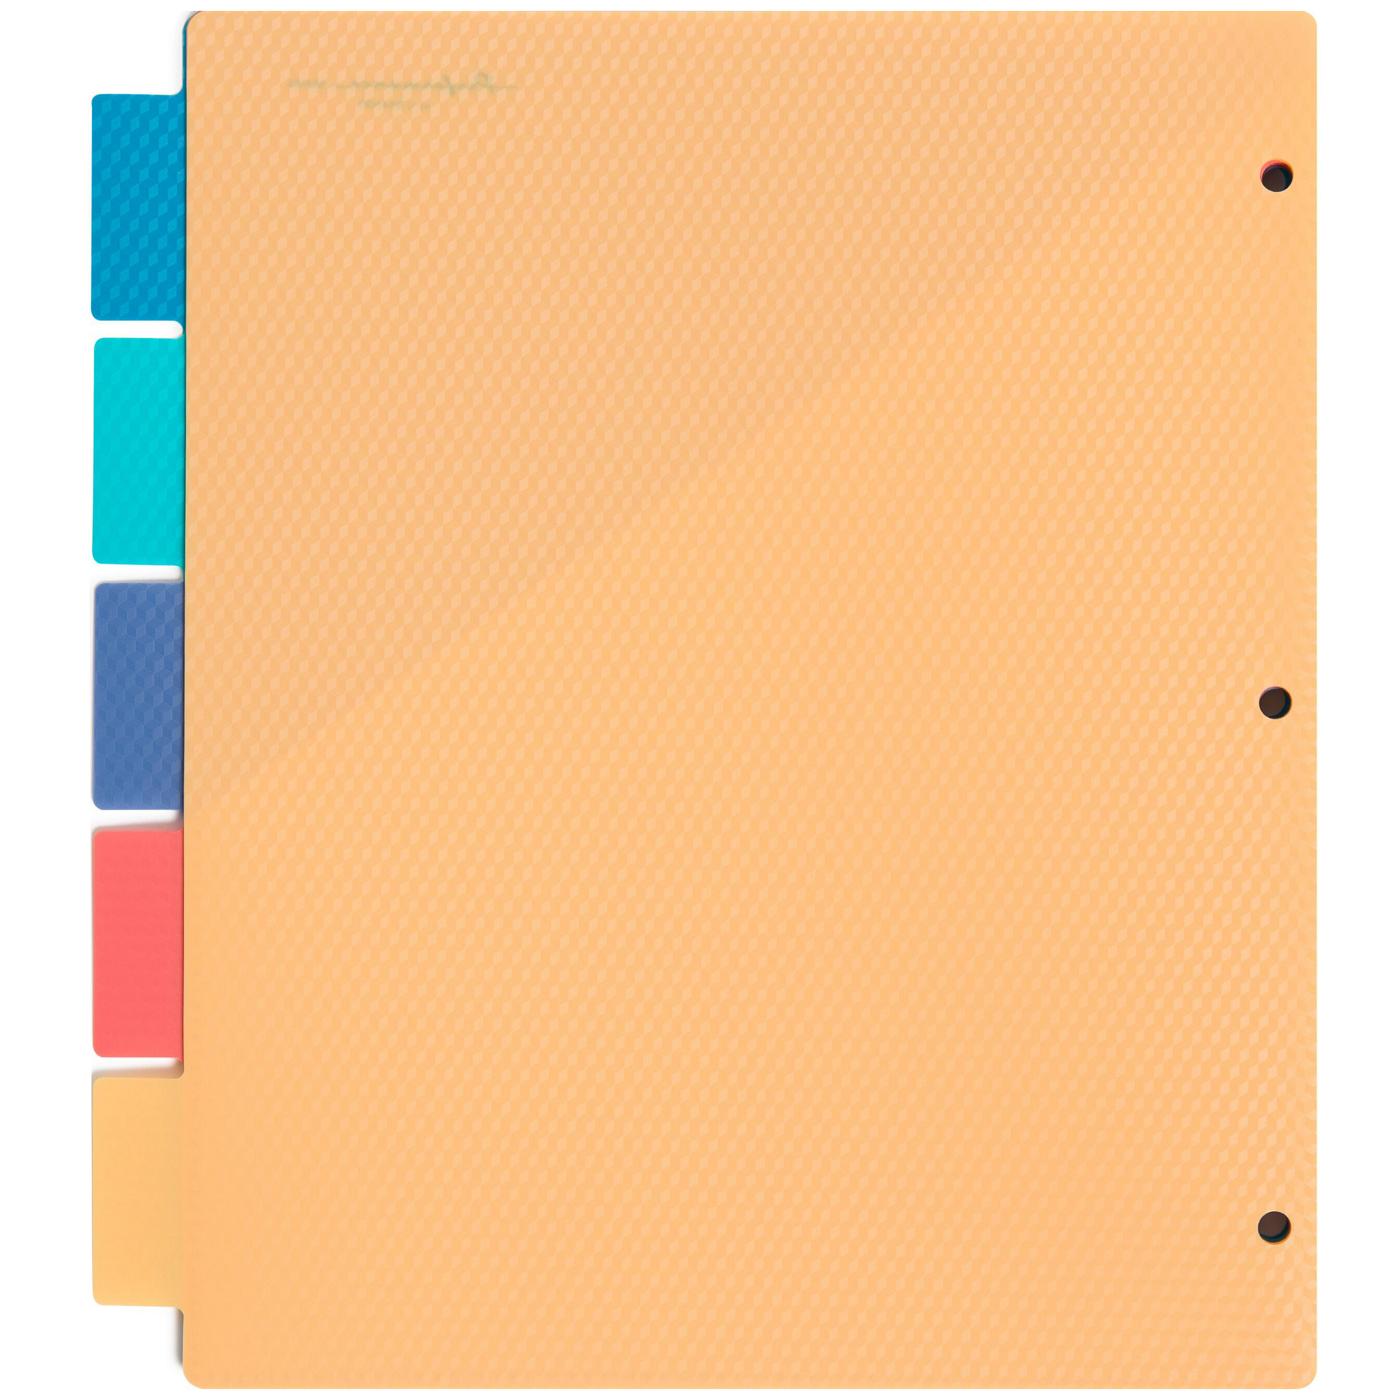 U Brands Performance Series Tab Dividers with Pockets - Brights, 5 Ct; image 2 of 4